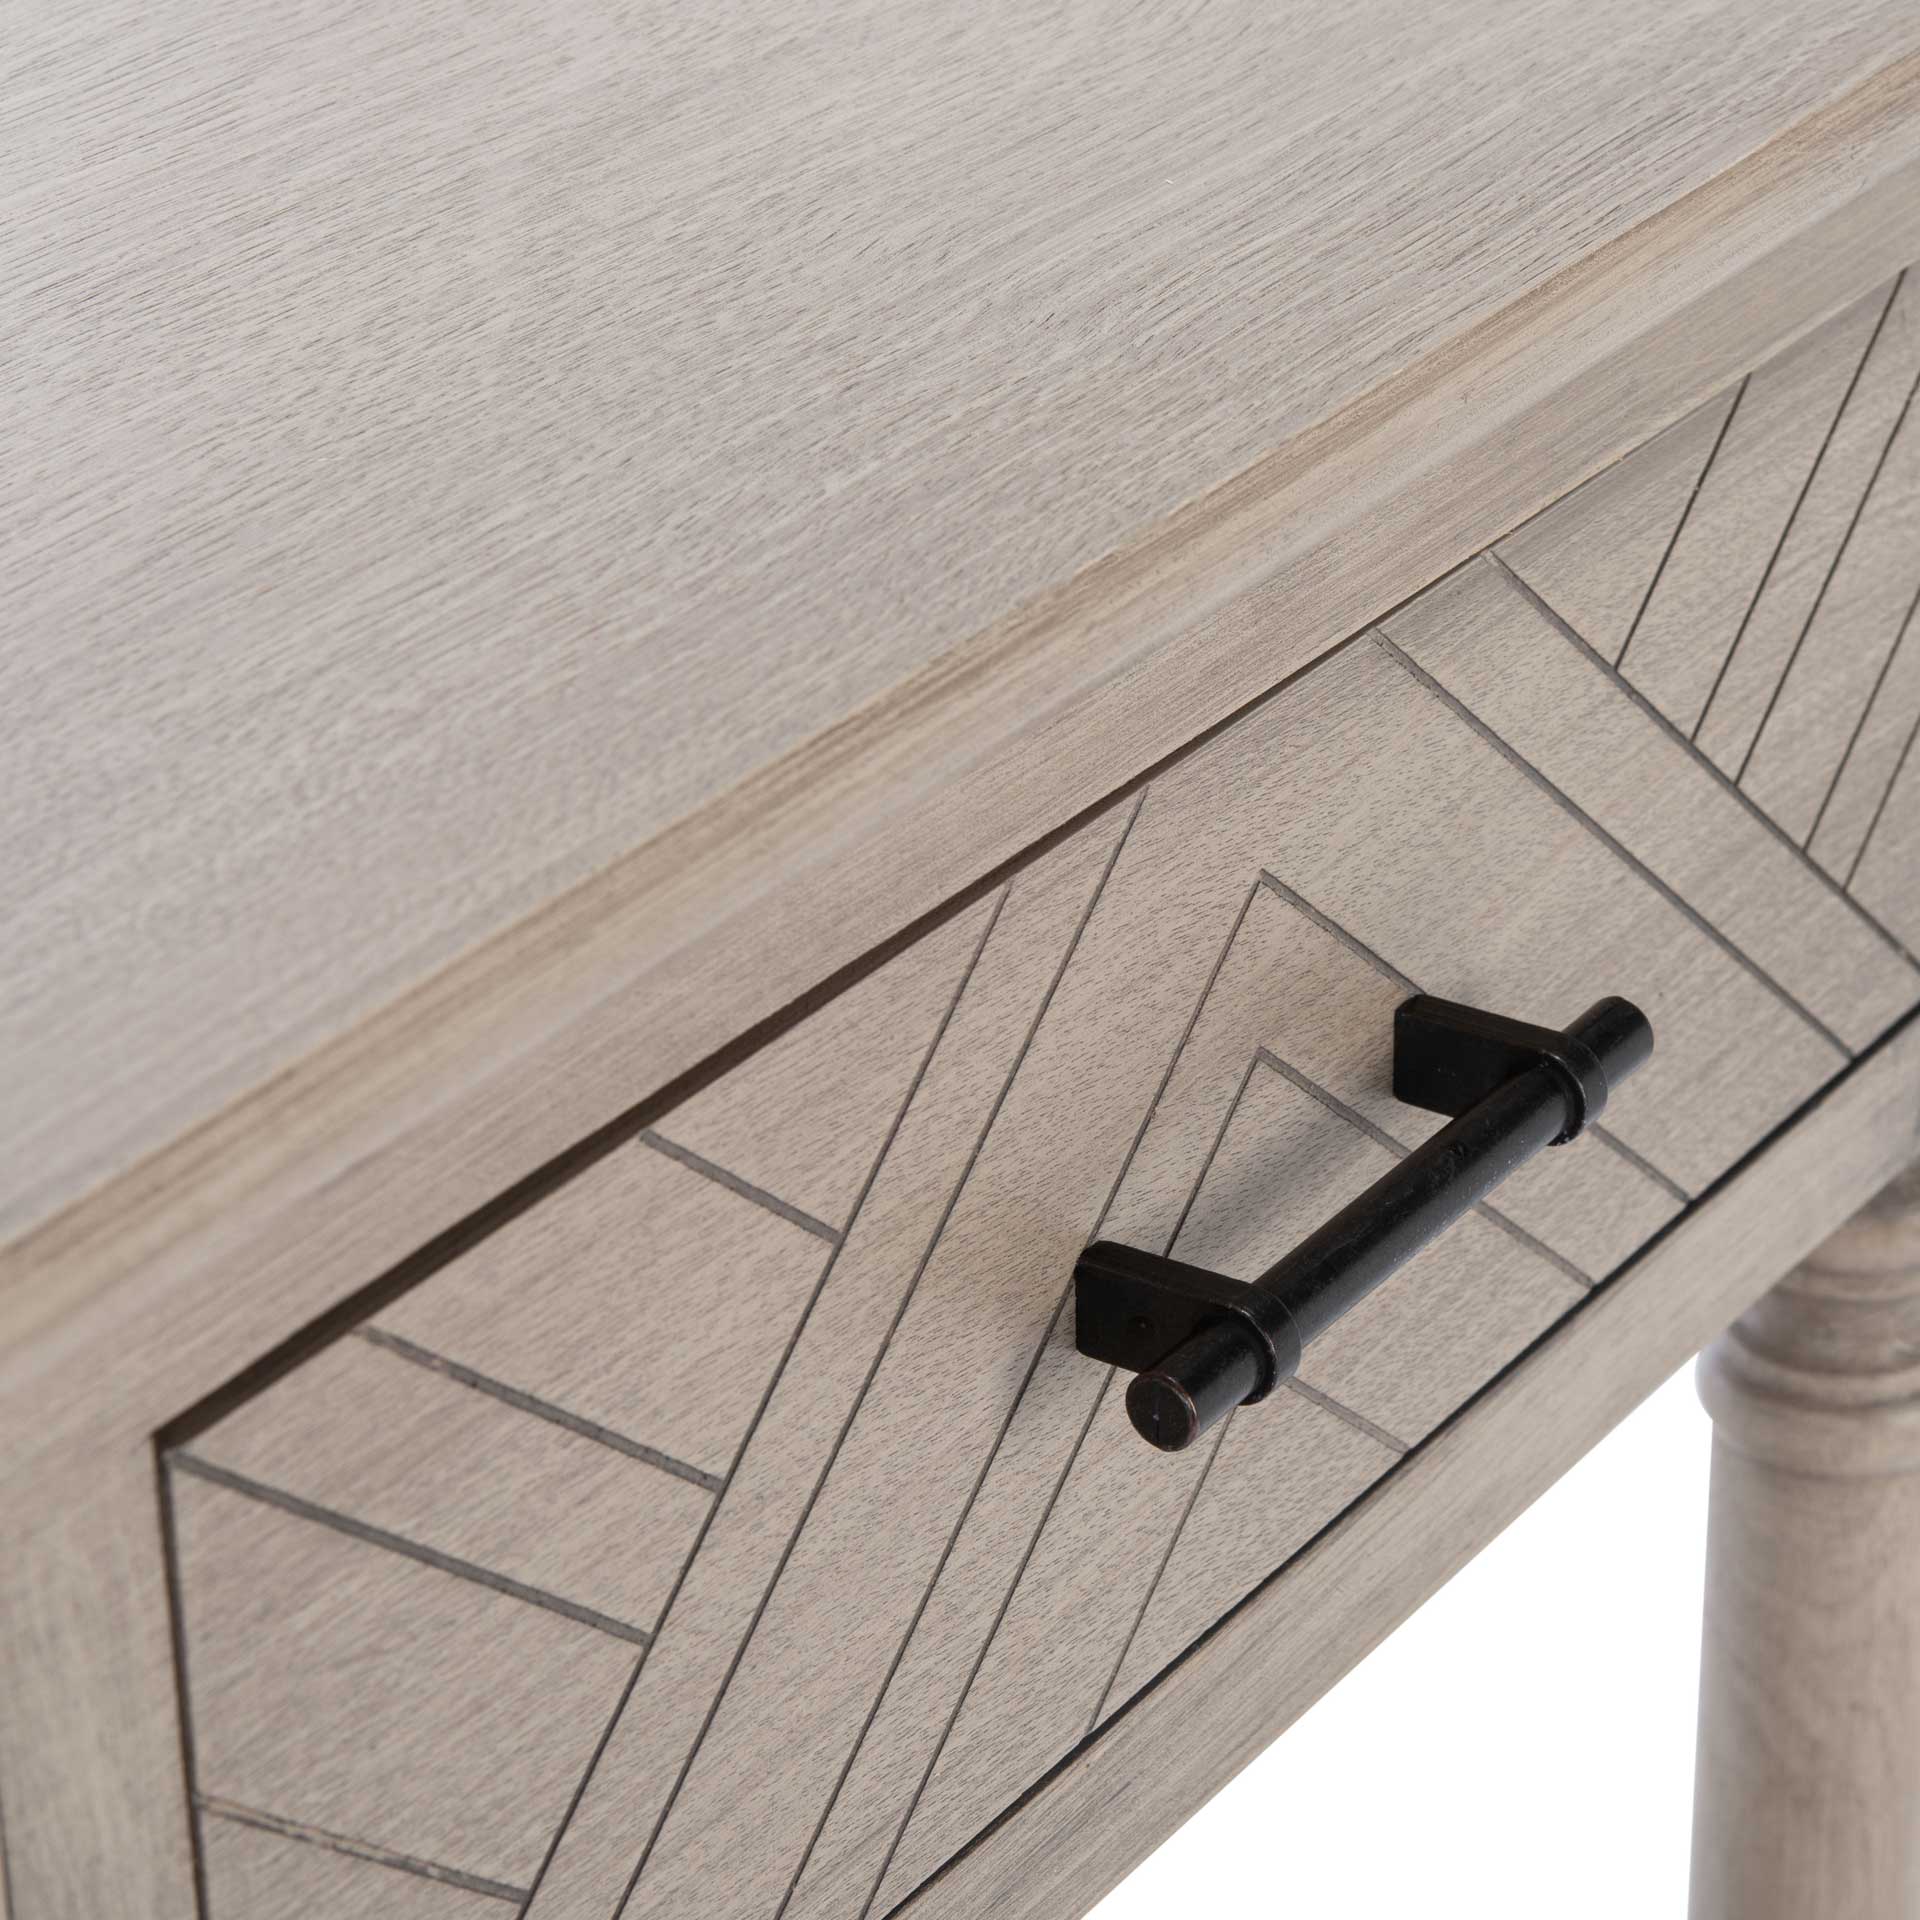 Pebbles 2 Drawer Console Table Greige